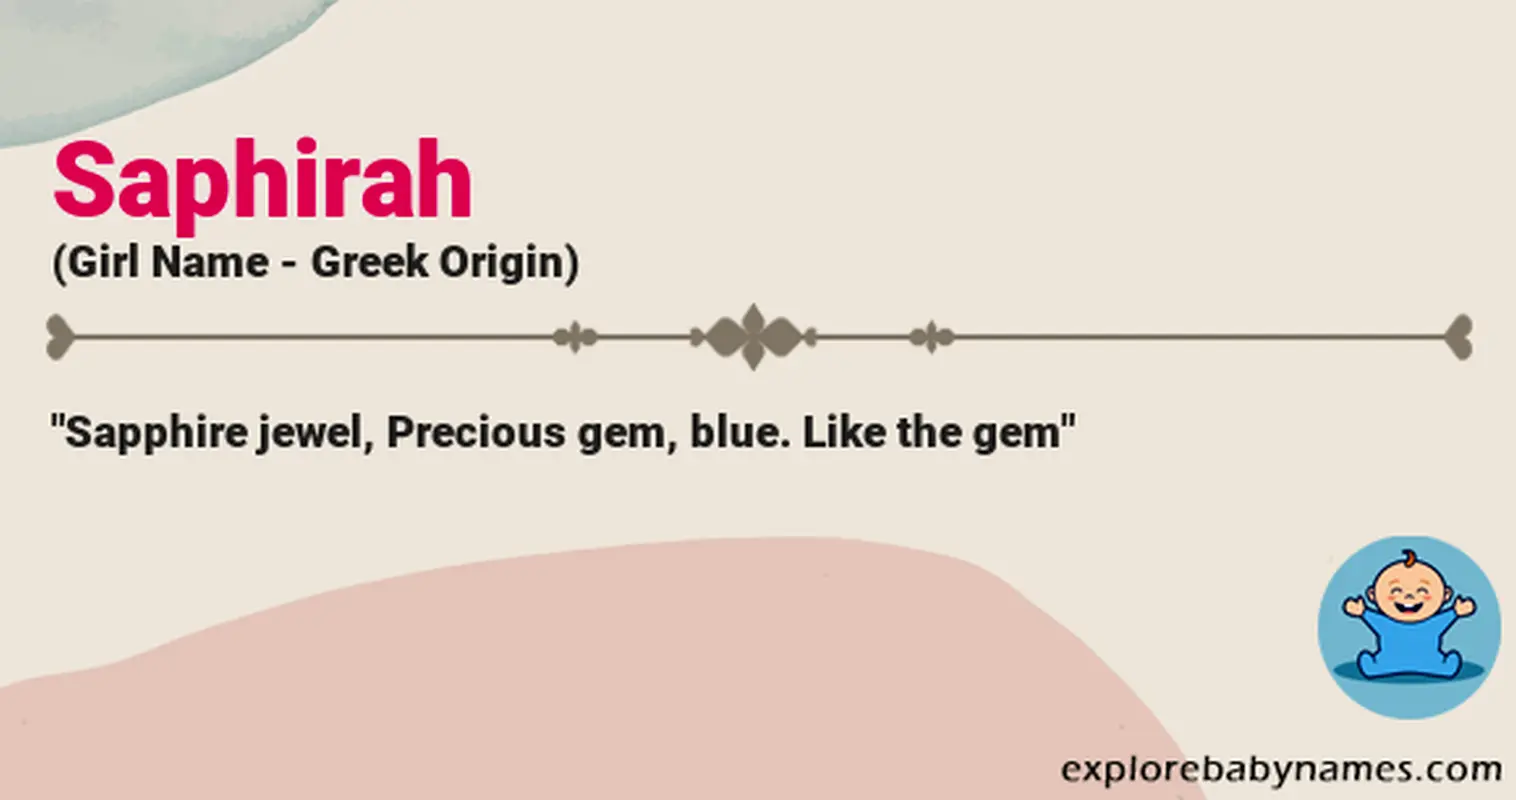 Meaning of Saphirah